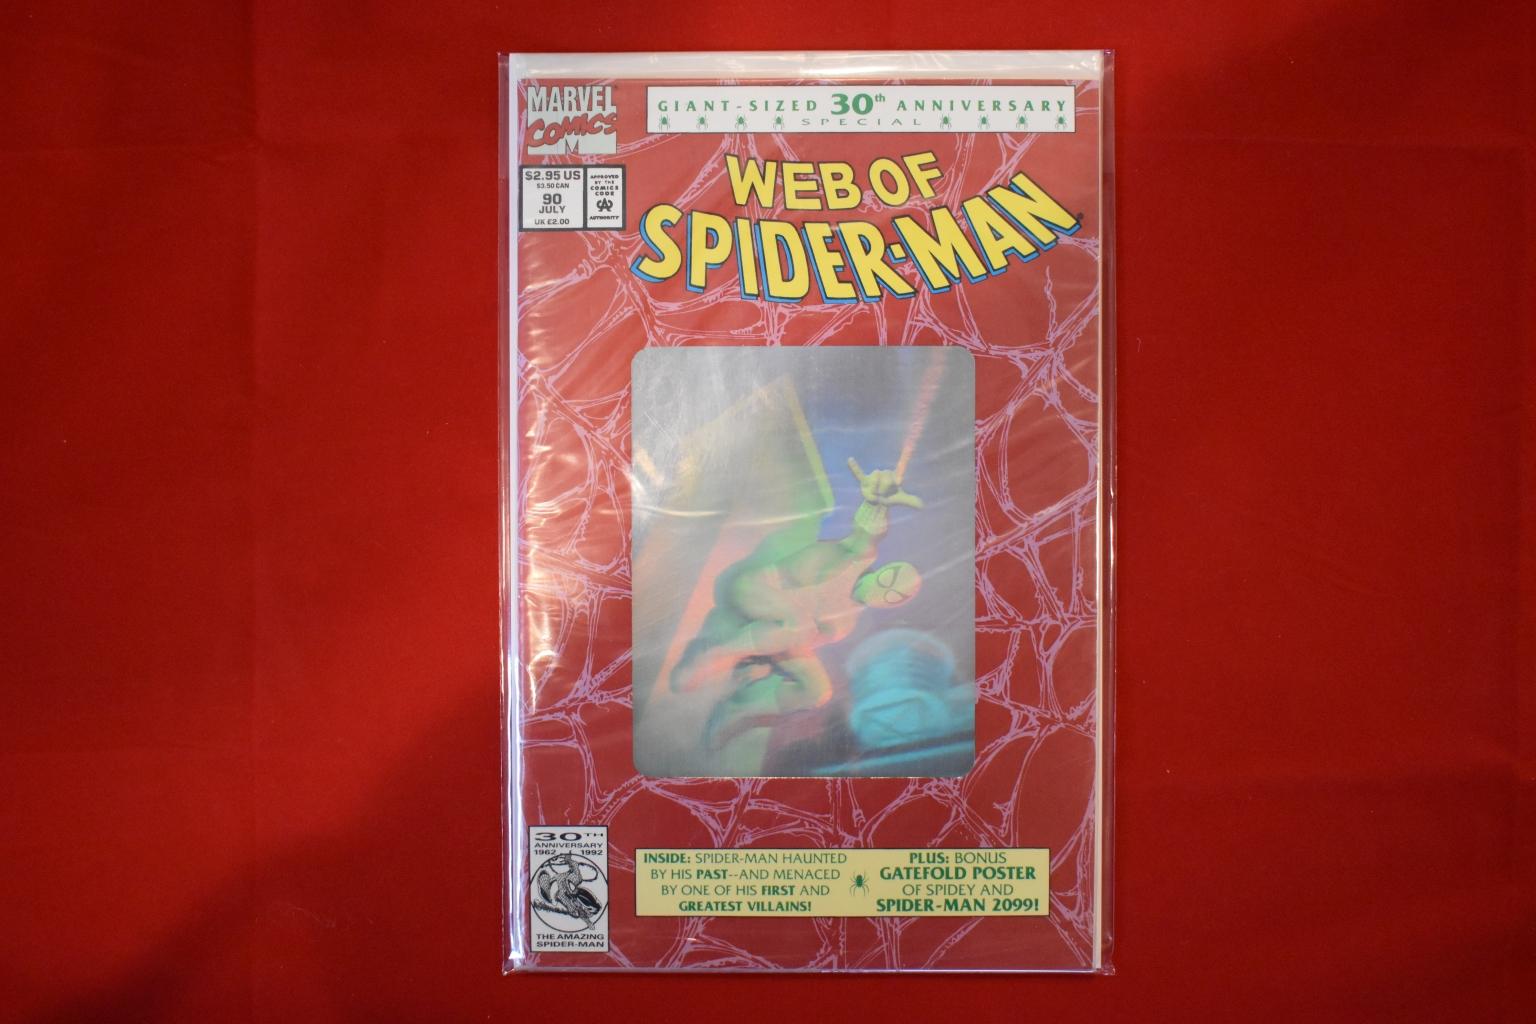 Web of Spider-Man # 90 | Hologram cover, giant-sized 30th Anniversary